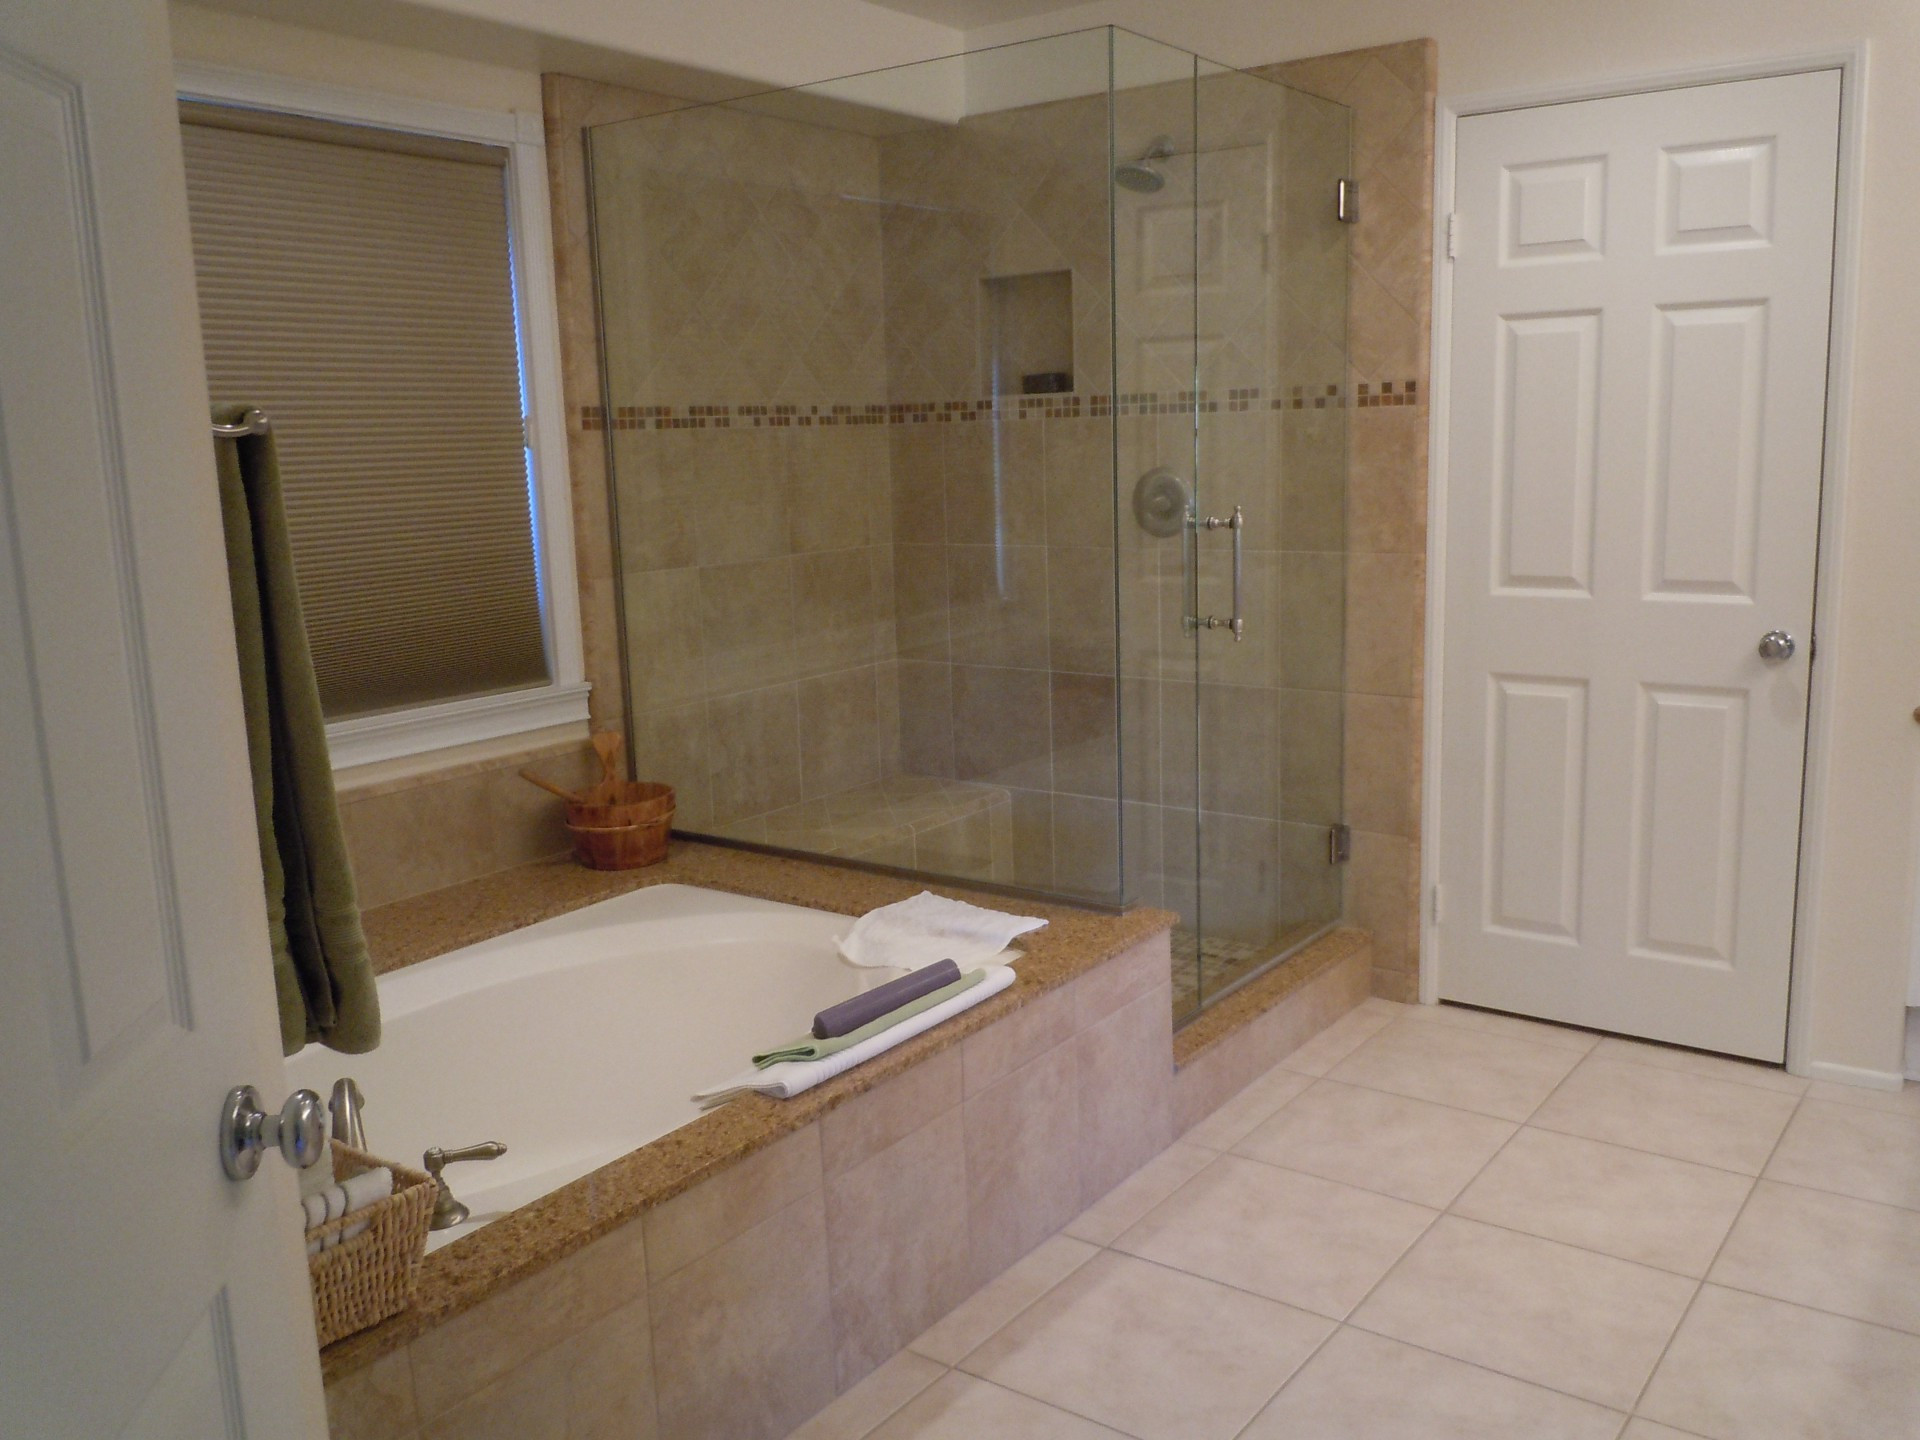 Complete Bathroom Remodel Cost
 Tag For Home remodeling cost Home Remodeling Cost Vs